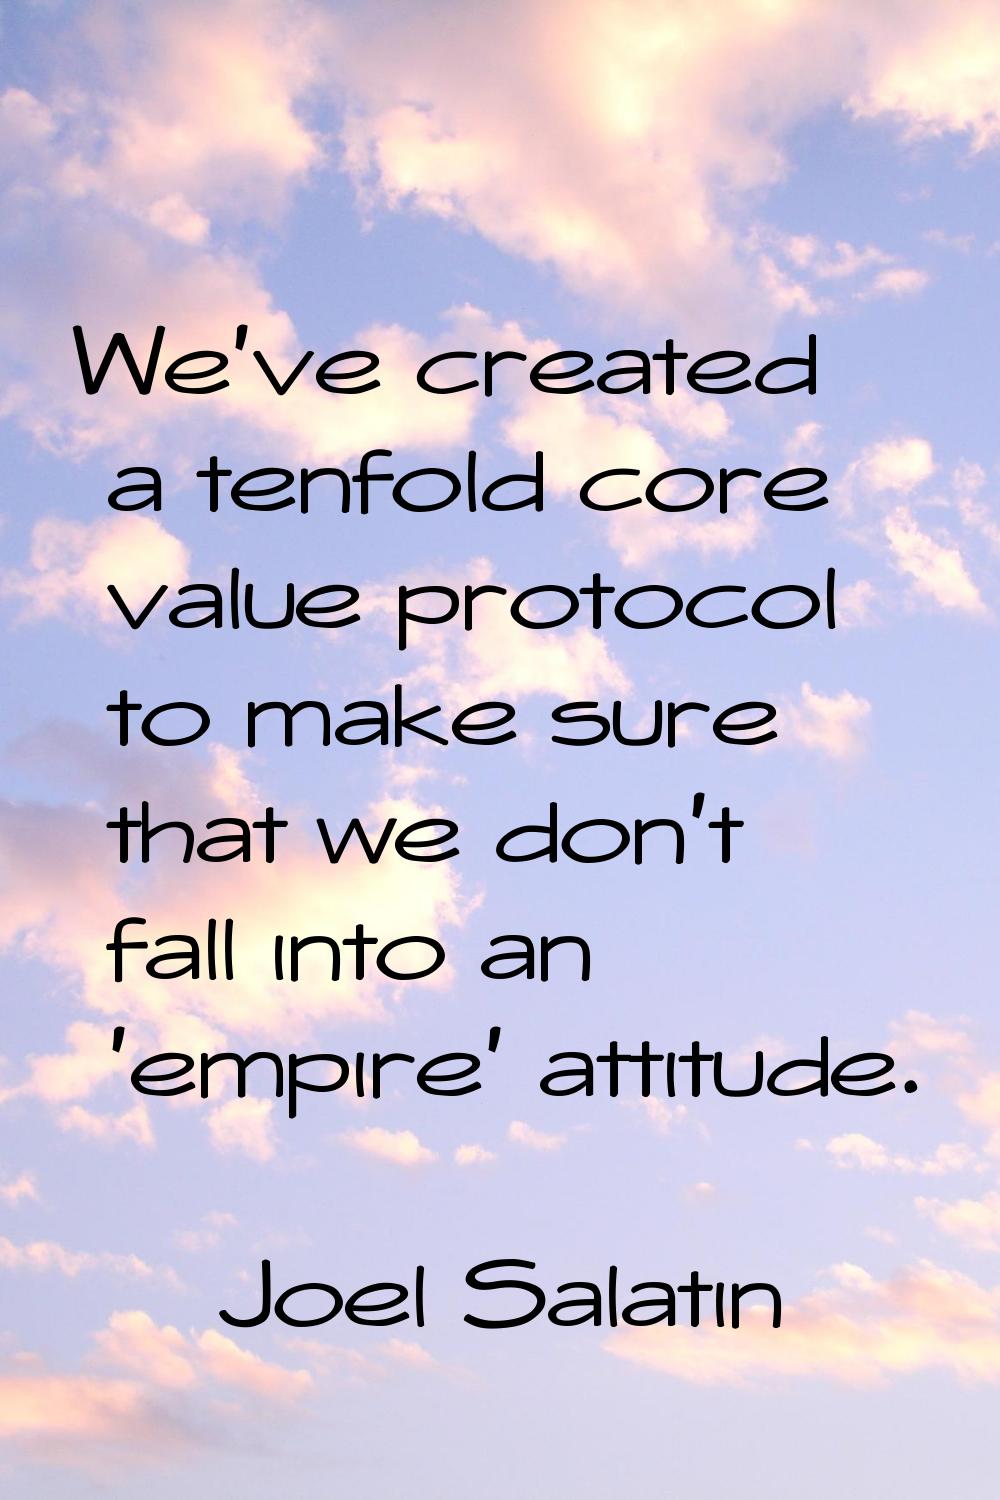 We've created a tenfold core value protocol to make sure that we don't fall into an 'empire' attitu